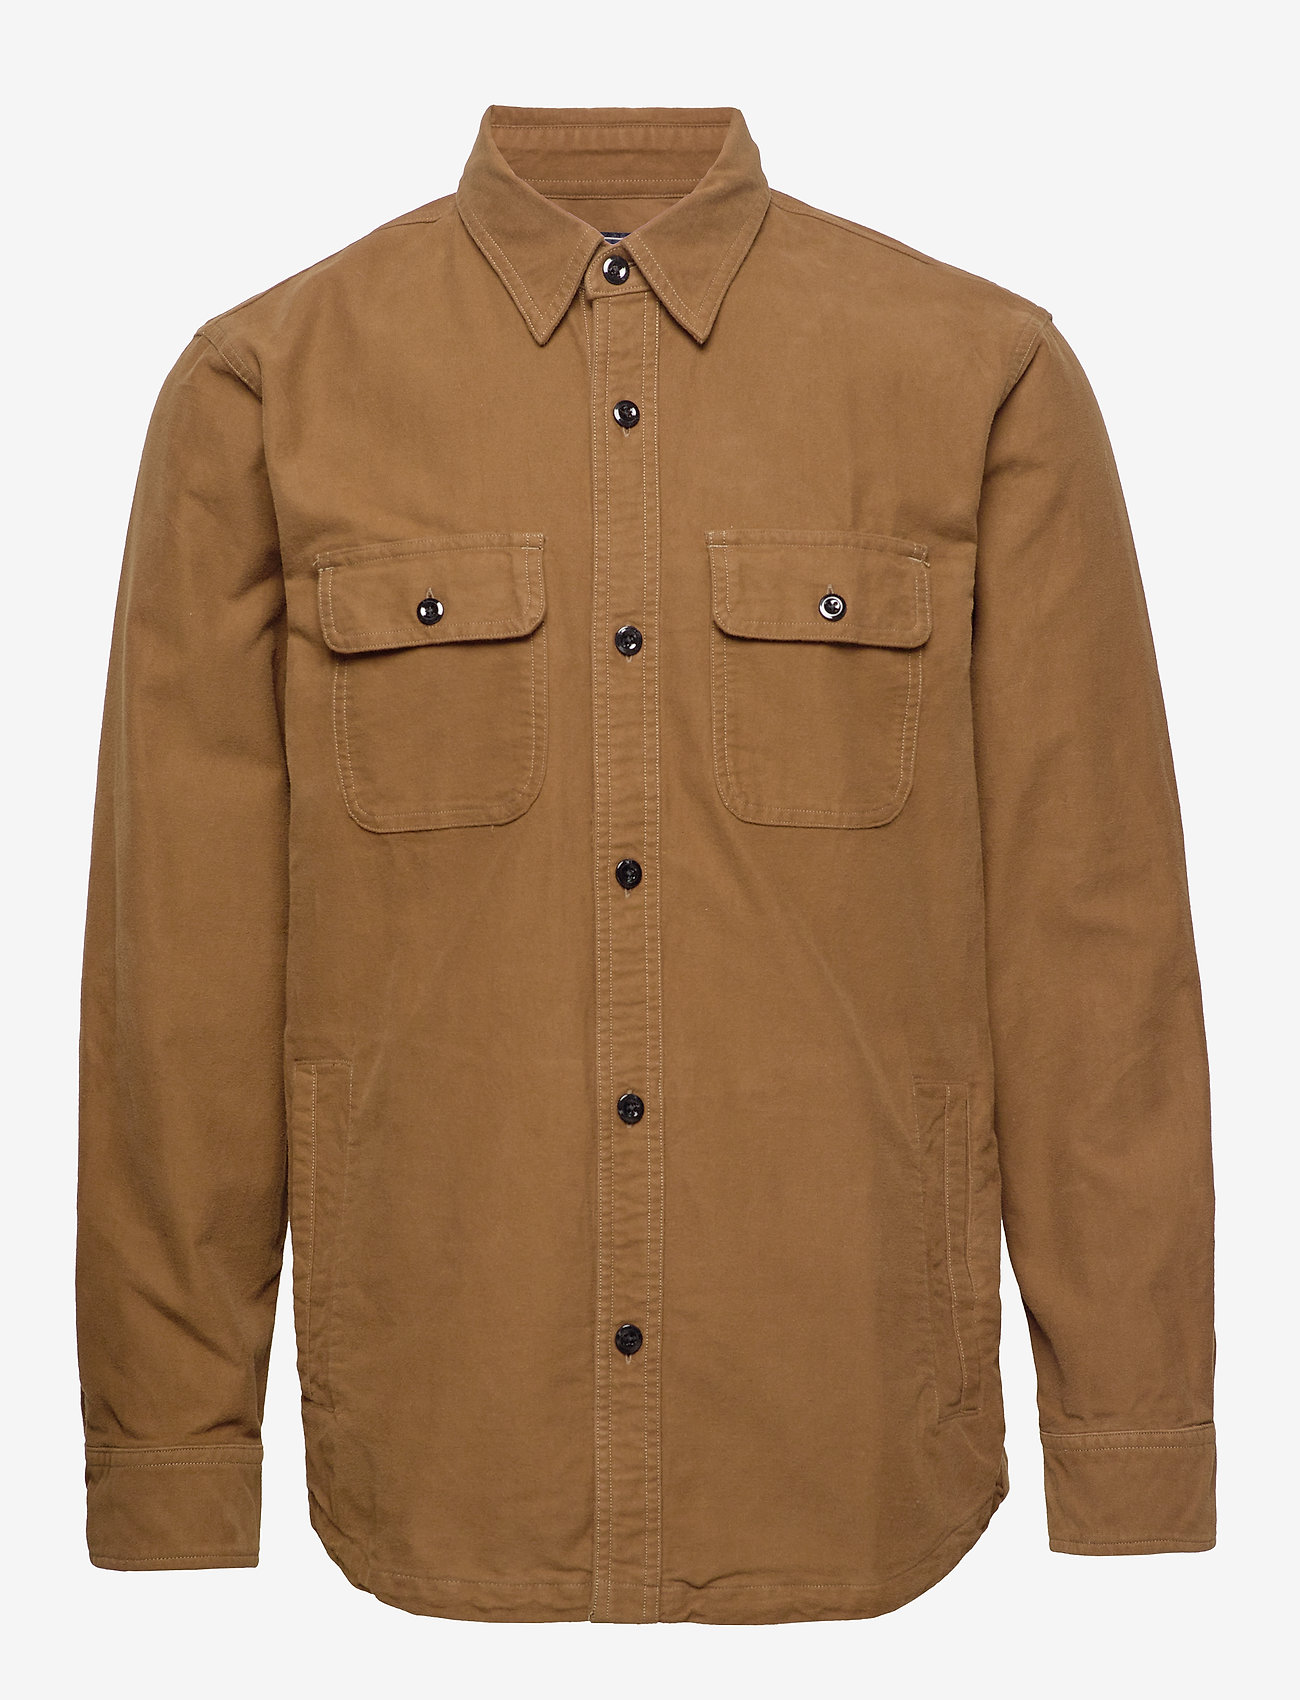 abercrombie and fitch shirt jacket